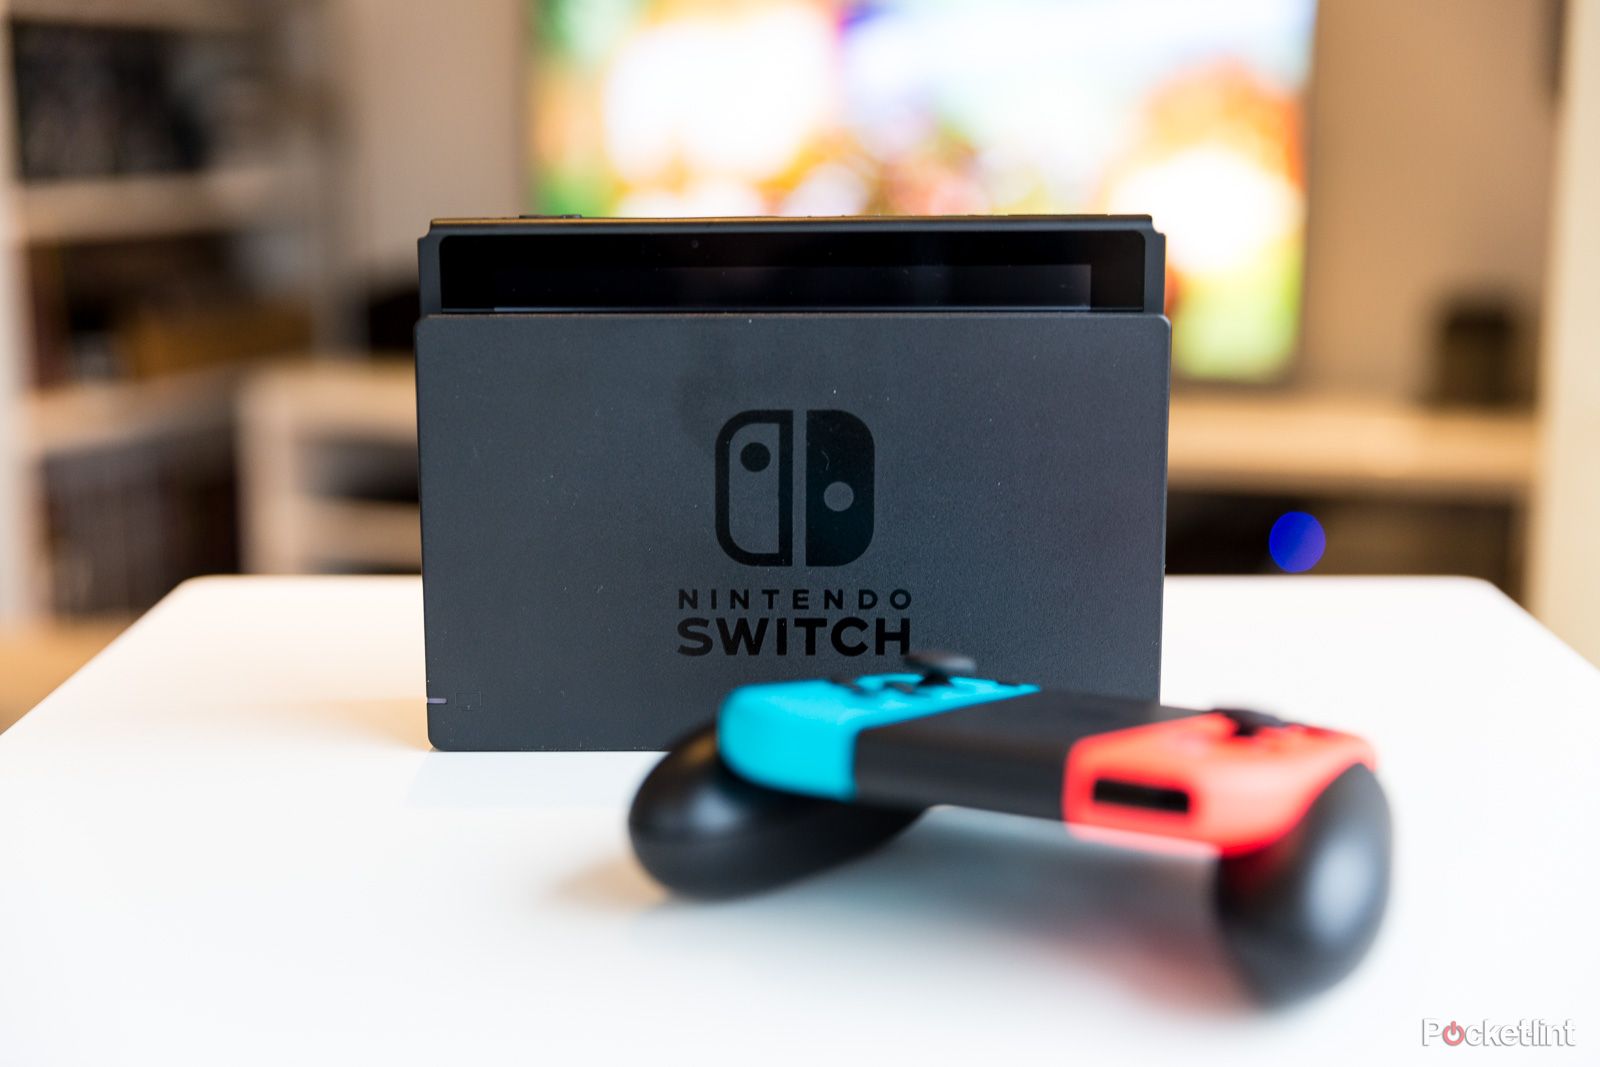 Nintendo Switch tips and tricks: How to get the most from your console